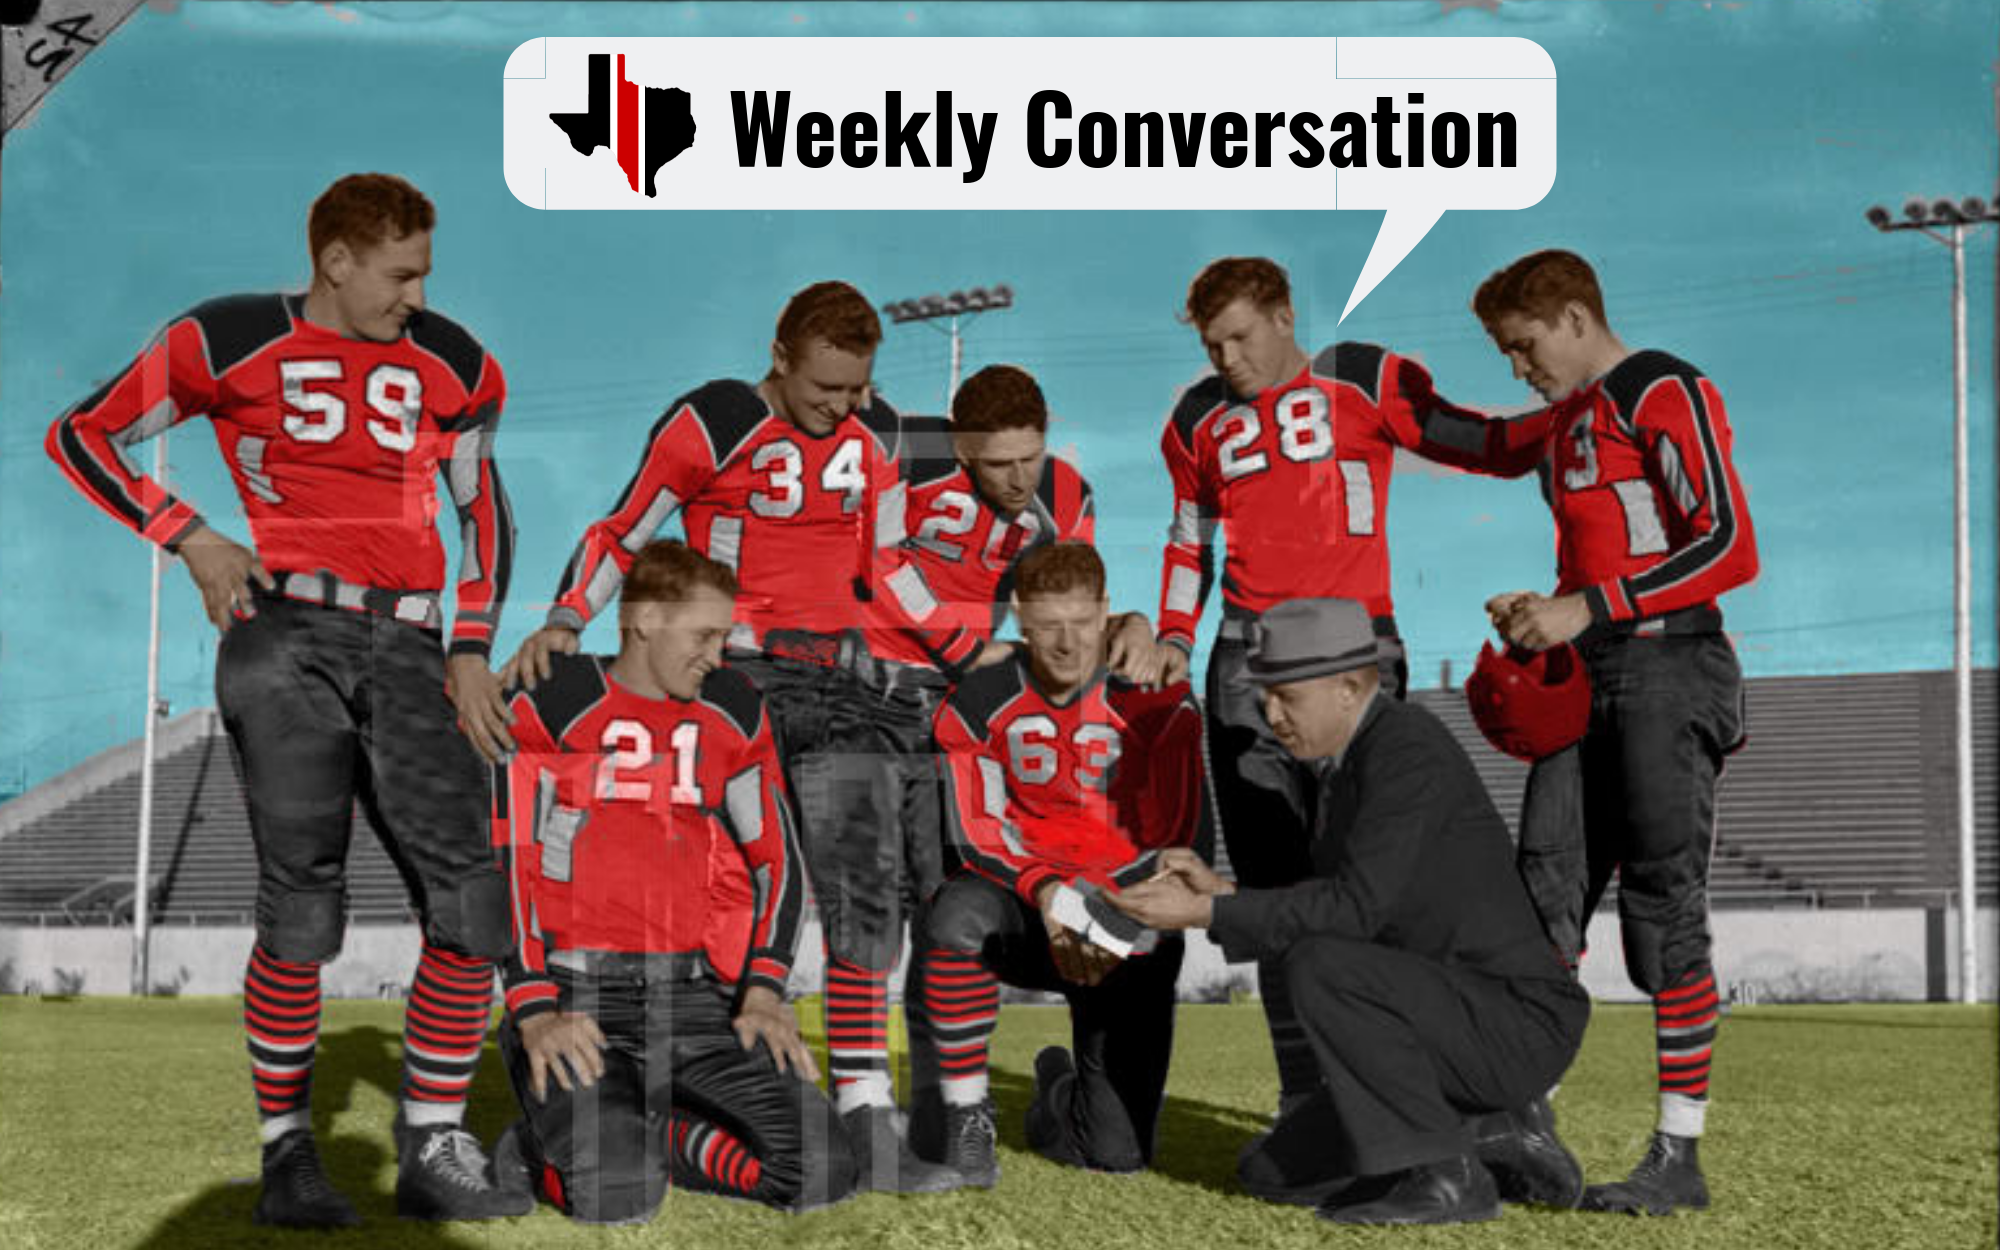 Weekly Conversation: Tech will win by tons of scores